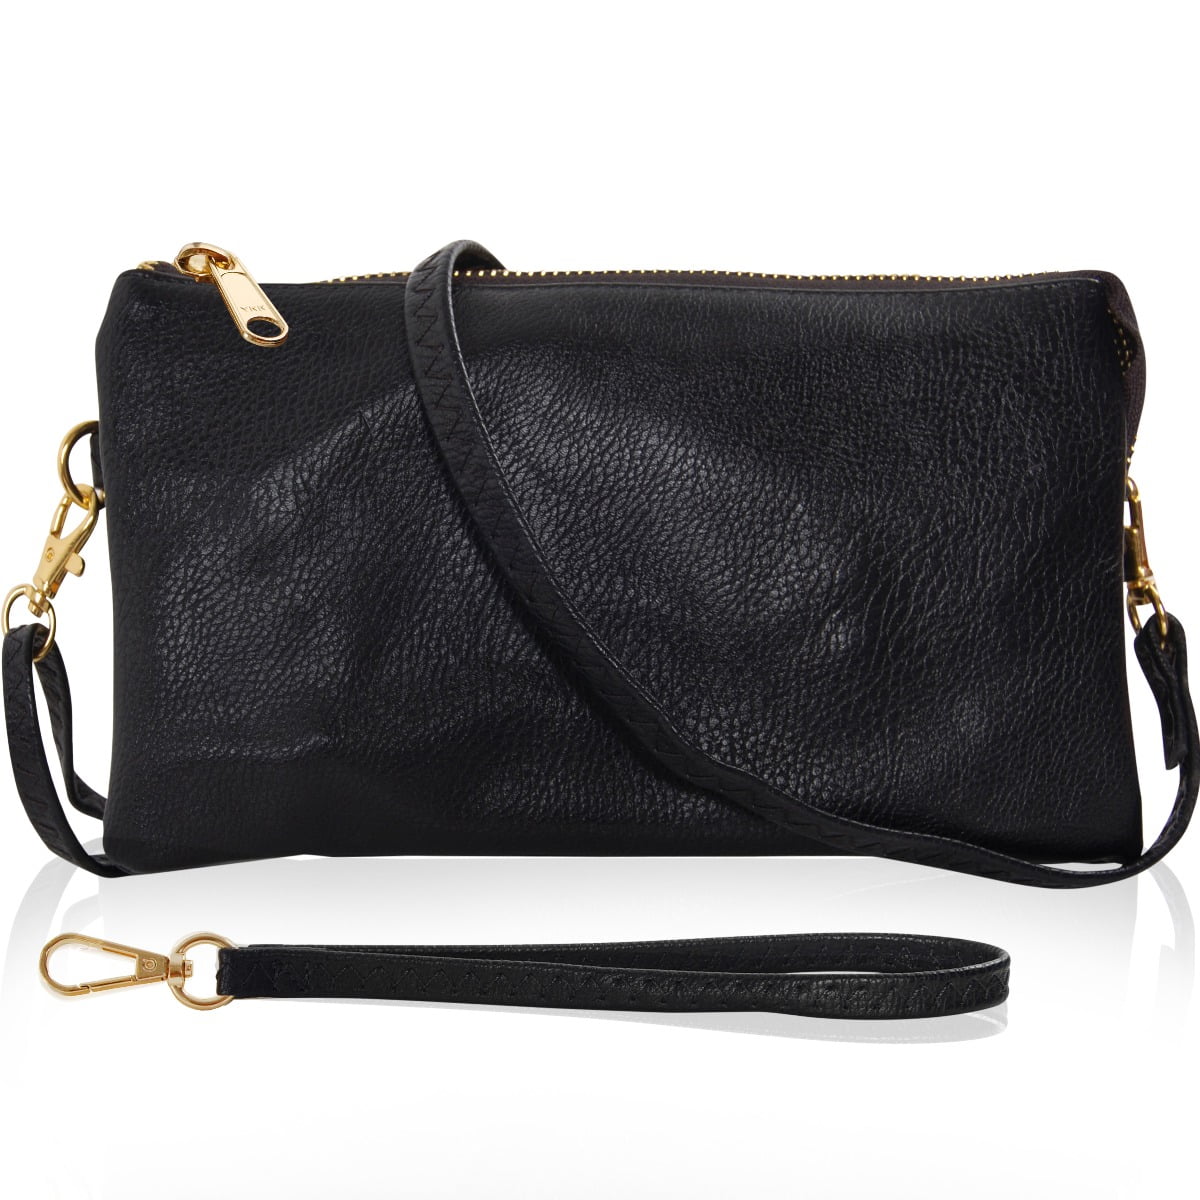 Humble Chic Vegan Leather Wristlet Clutch or Small Purse Crossbody Bag Includes Adjustable Shoulder and Wrist Straps 